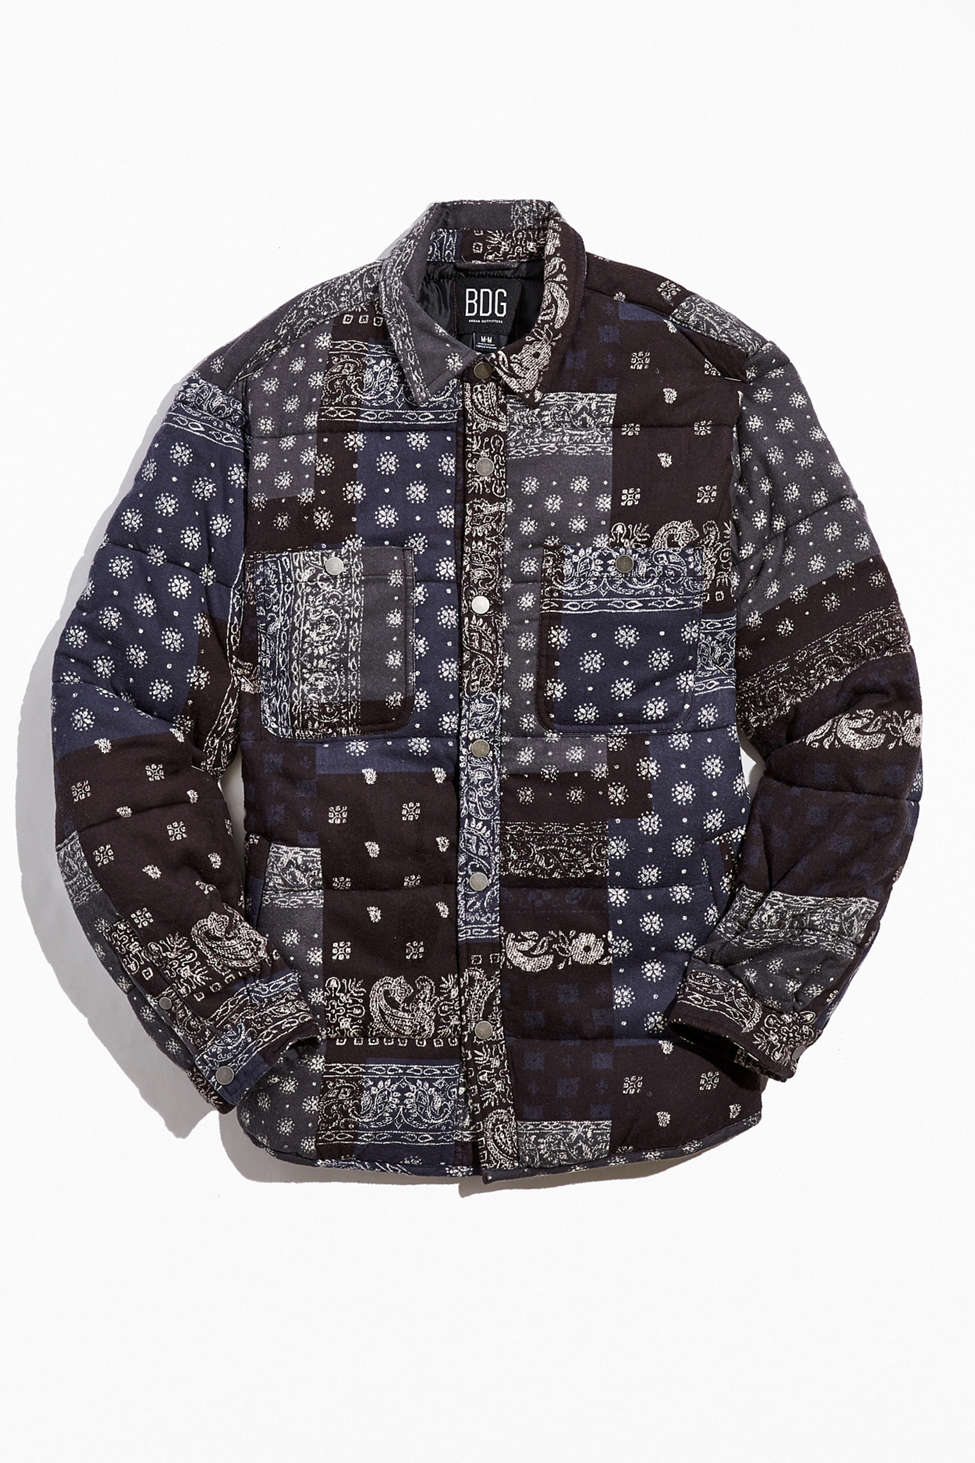 BDG Bandana Quilted Shirt Jacket | Urban Outfitters